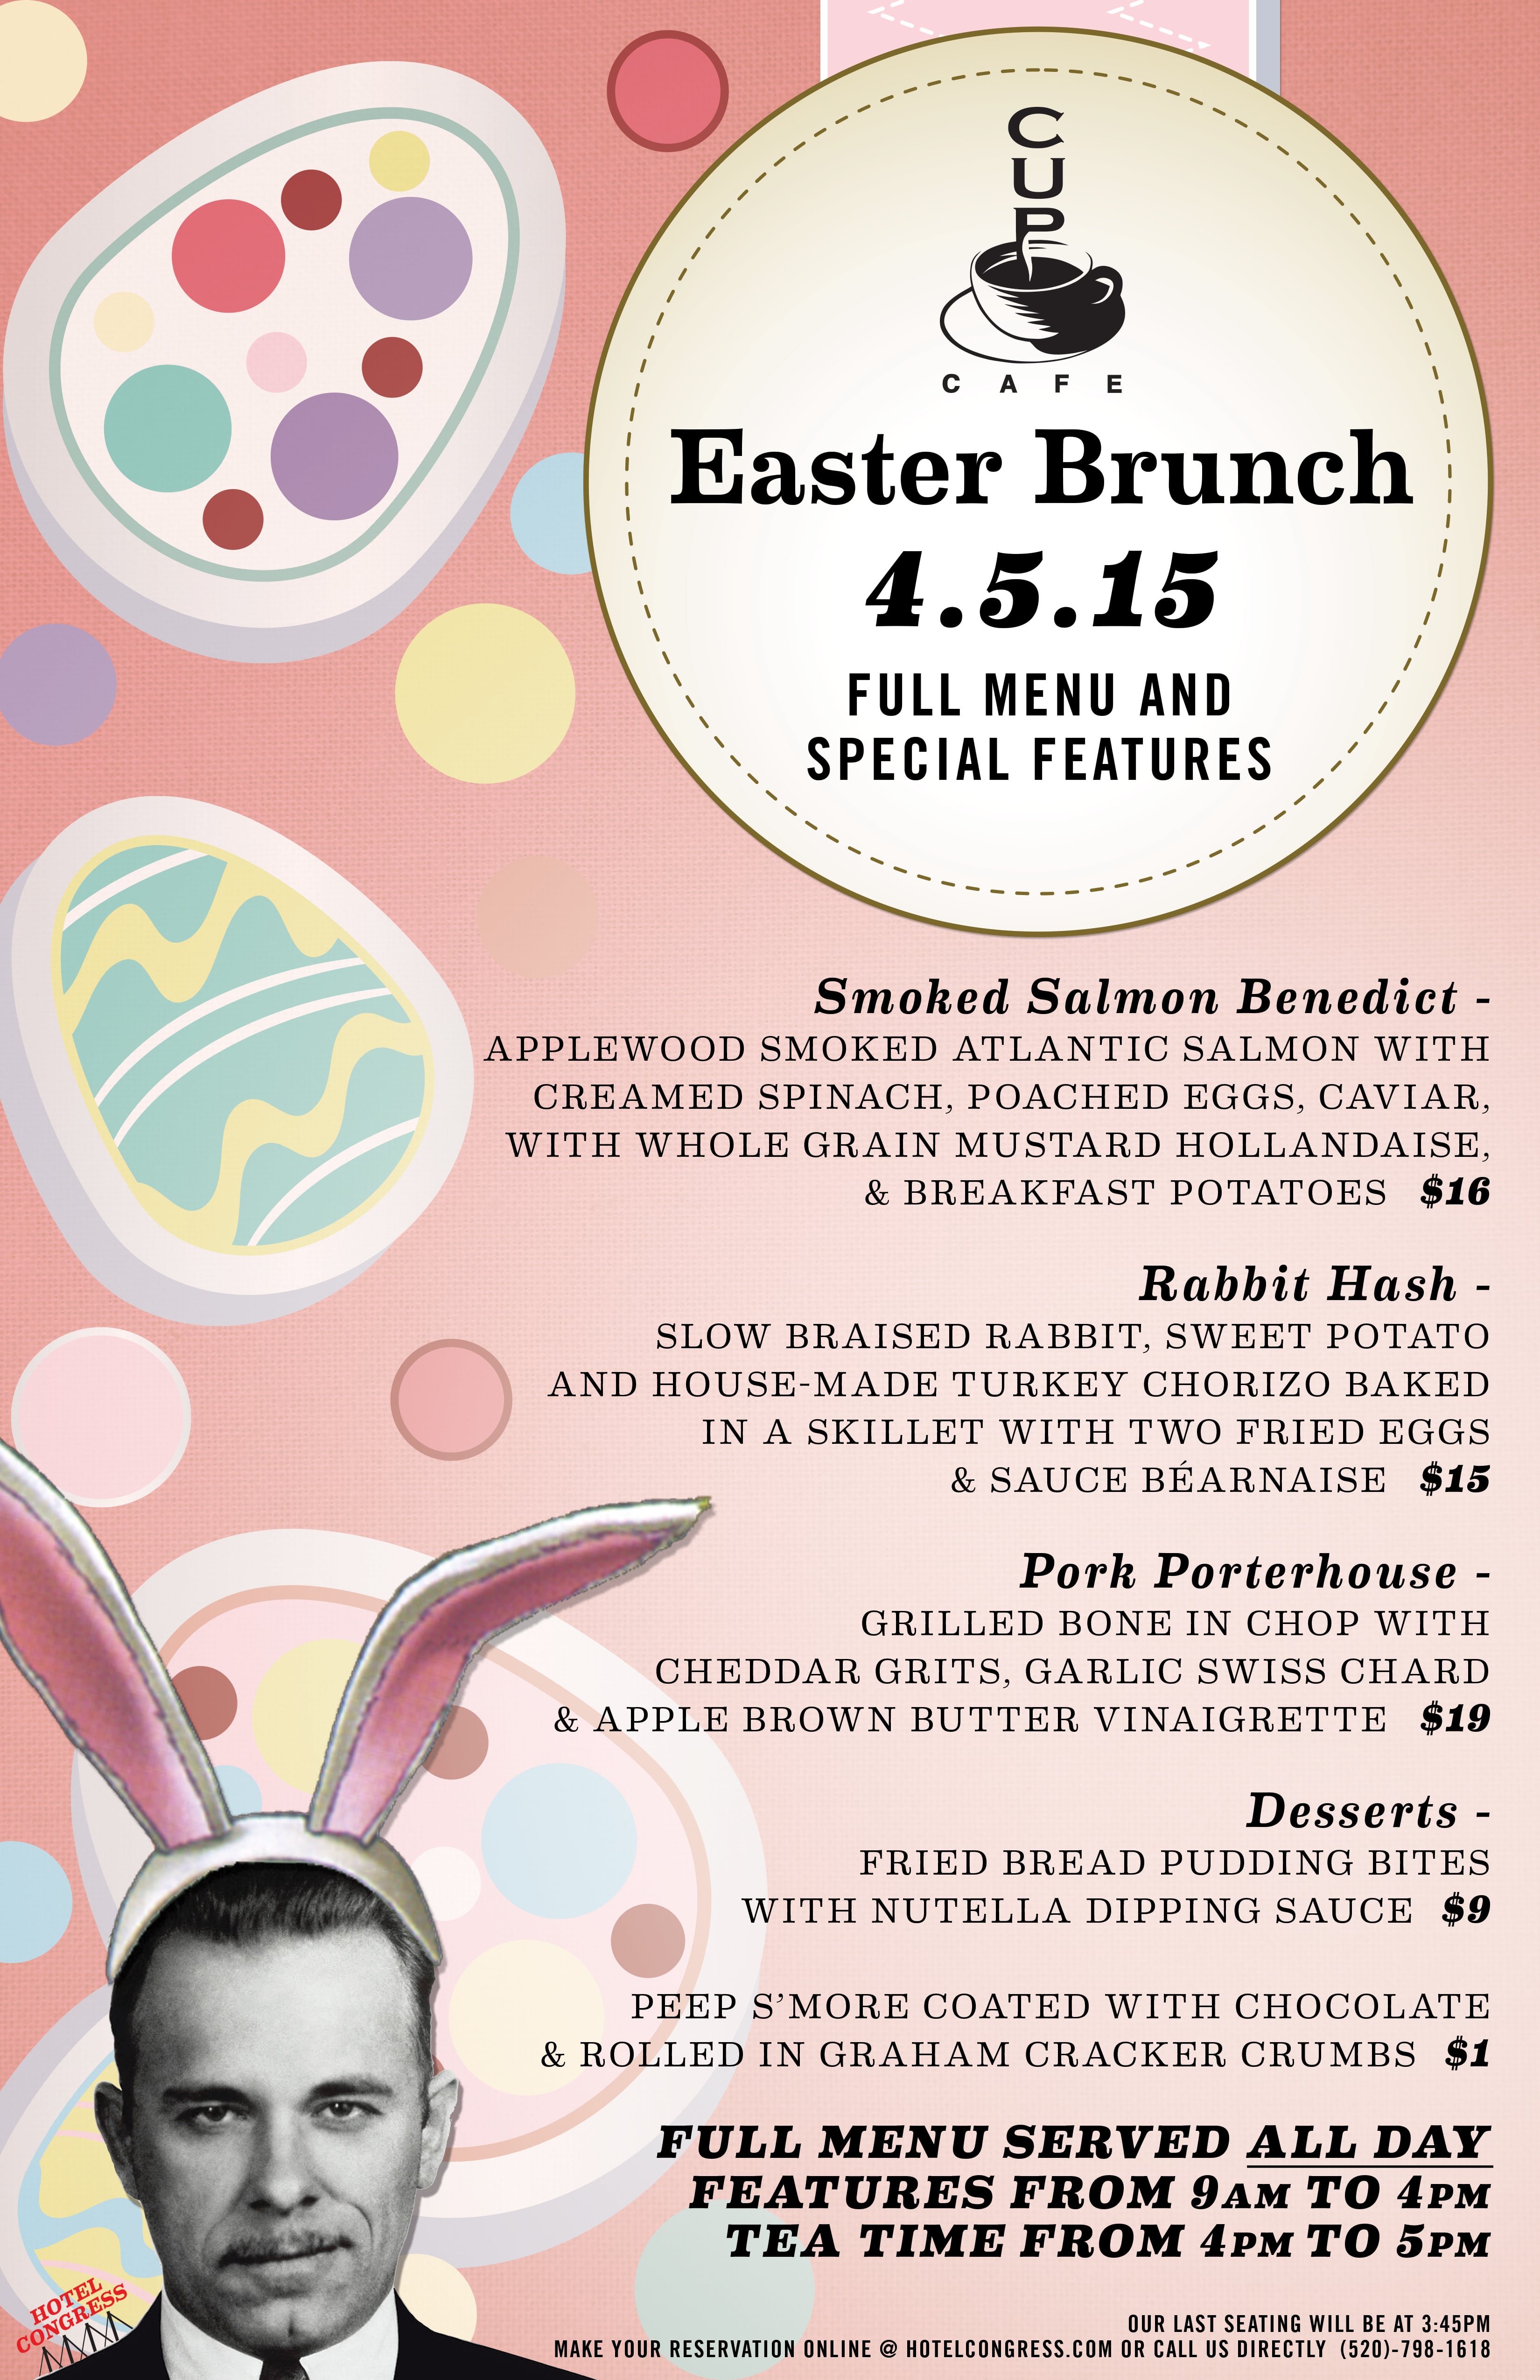 8 Places to Get Easter Brunch this Sunday The Range The Tucson